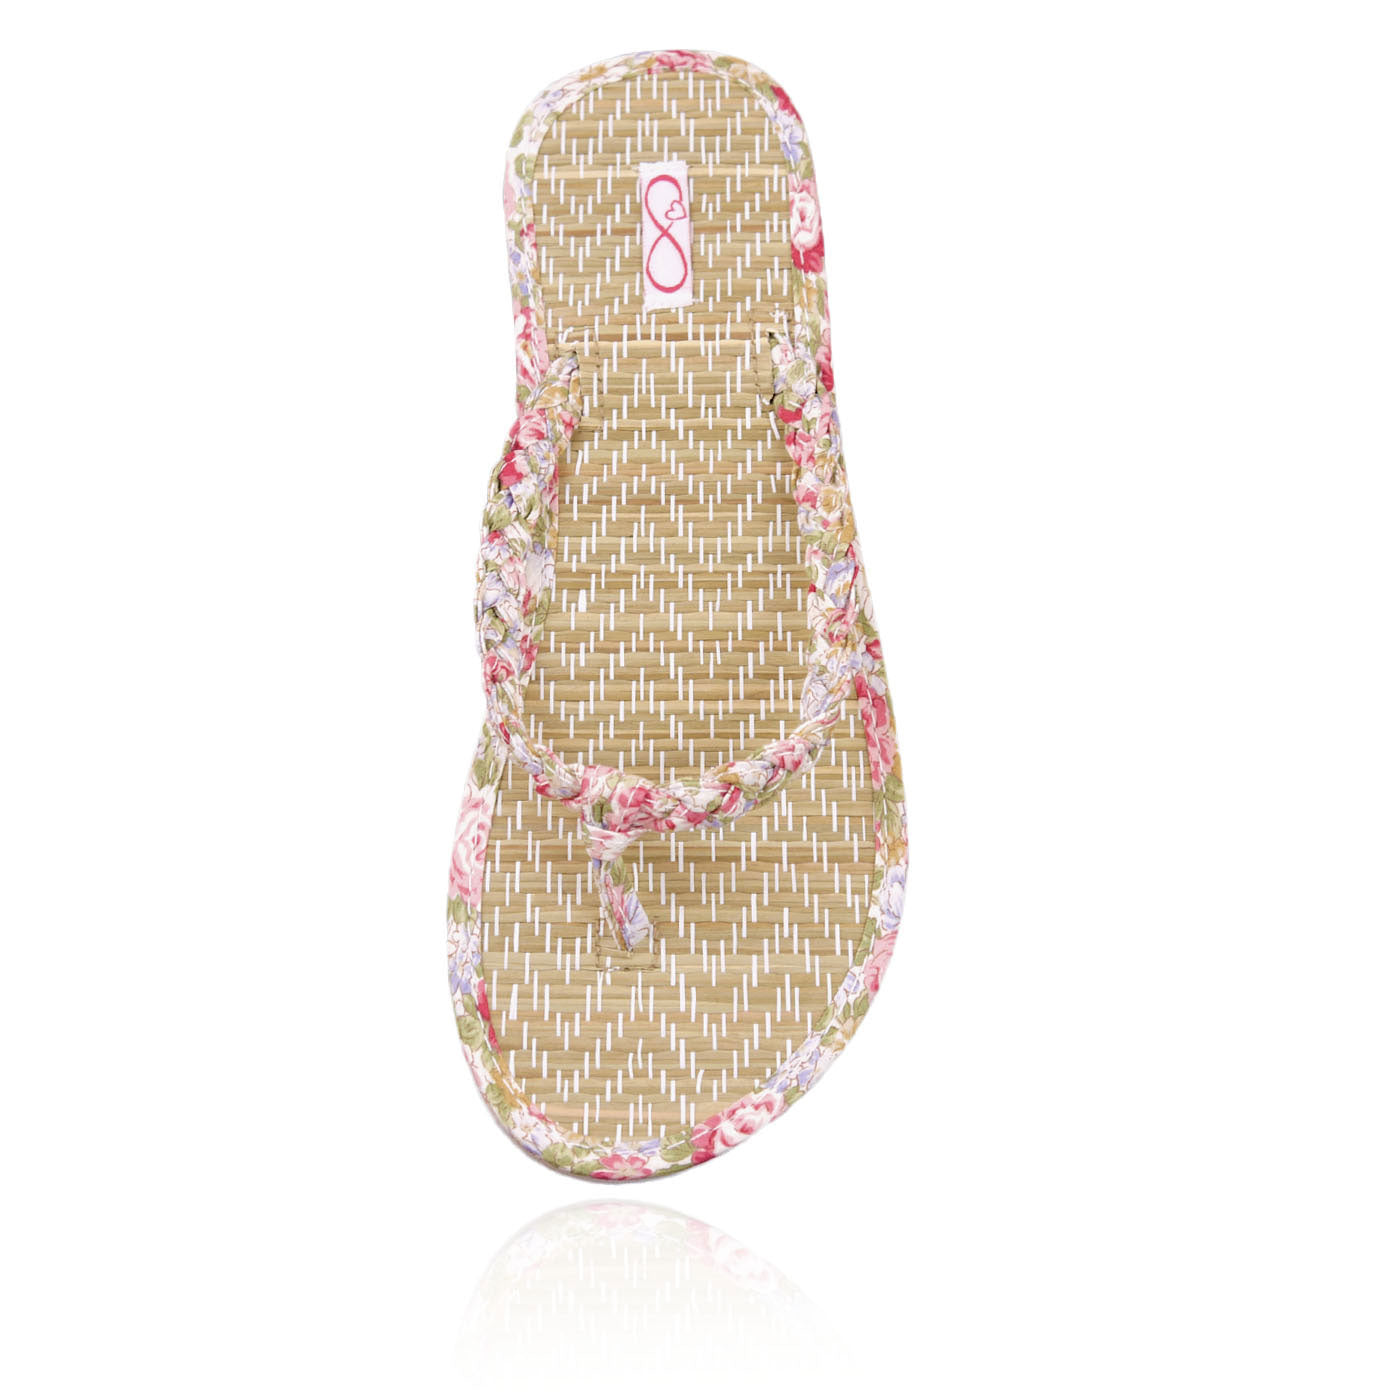 10 Pairs of pink beach flip-flops in a Party box